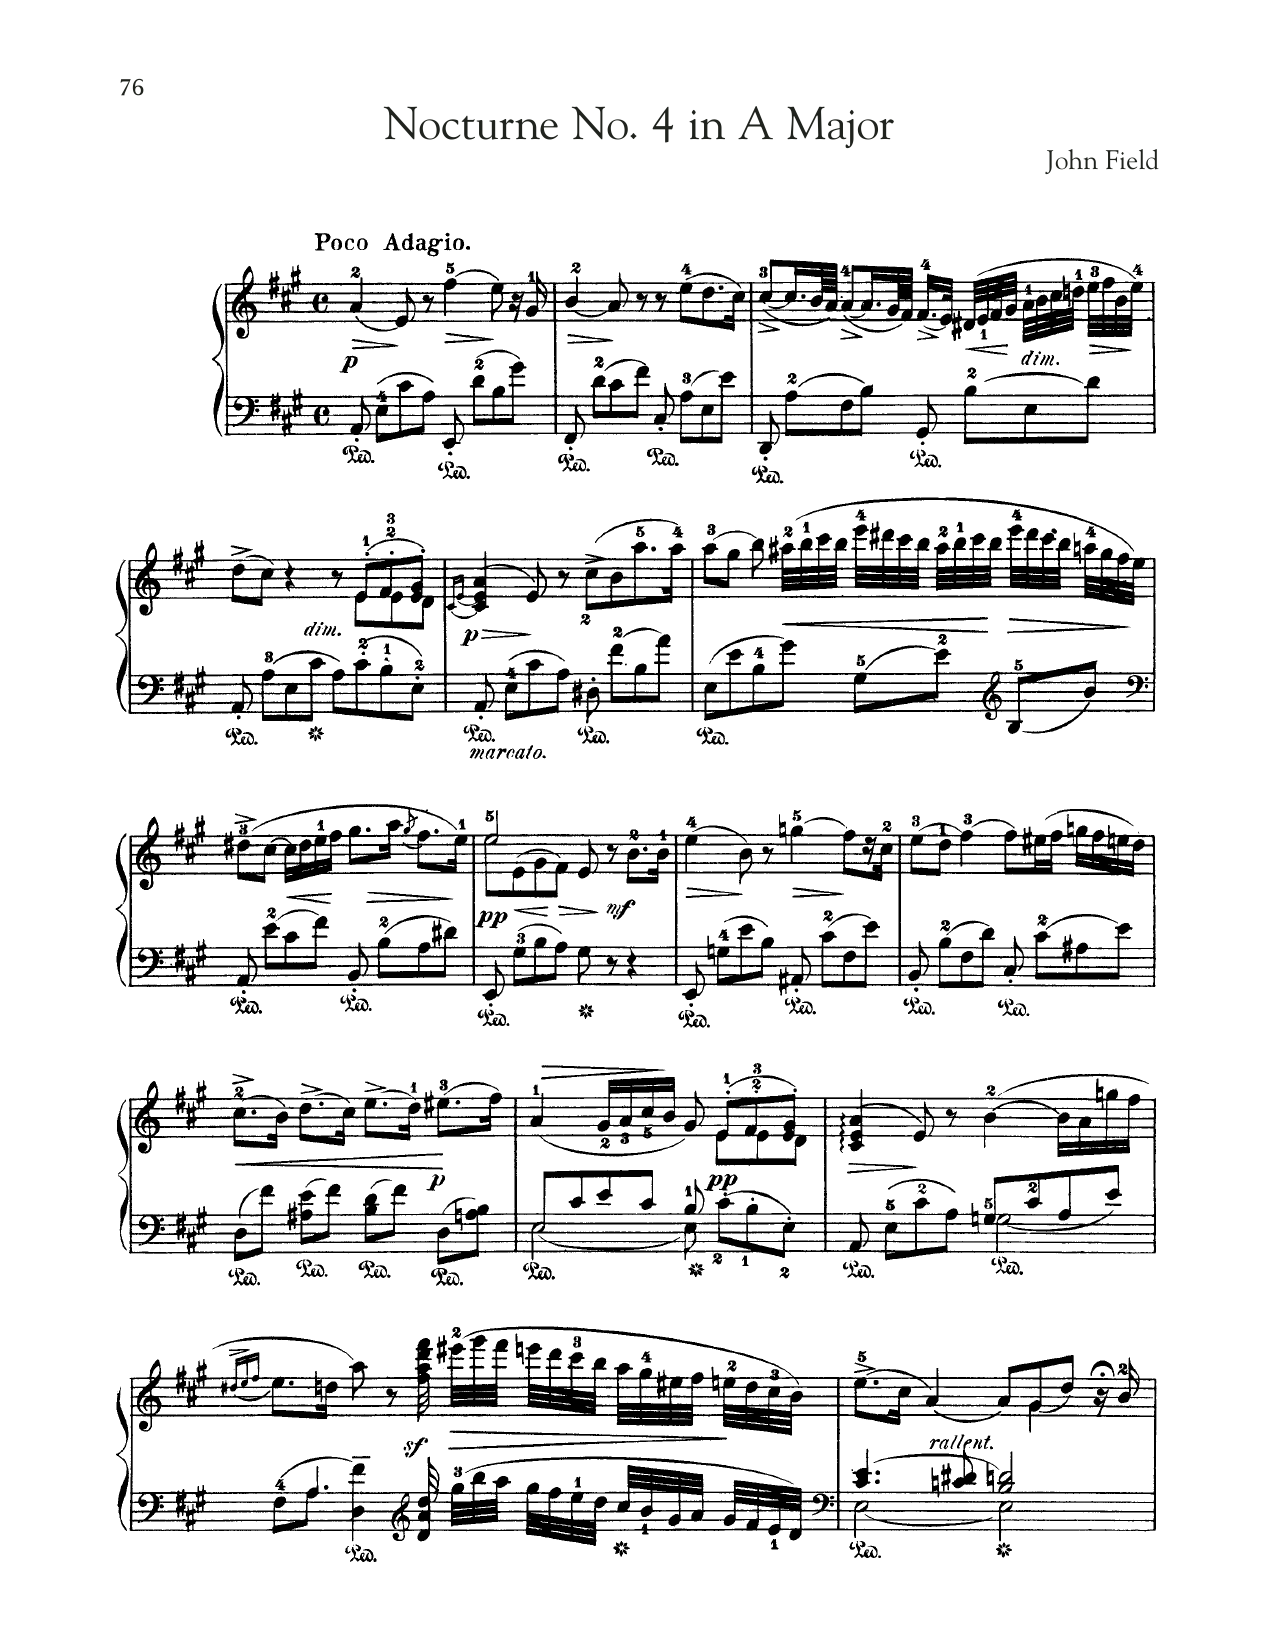 Download John Field Nocturne No. 4 In A Major, H. 36 Sheet Music